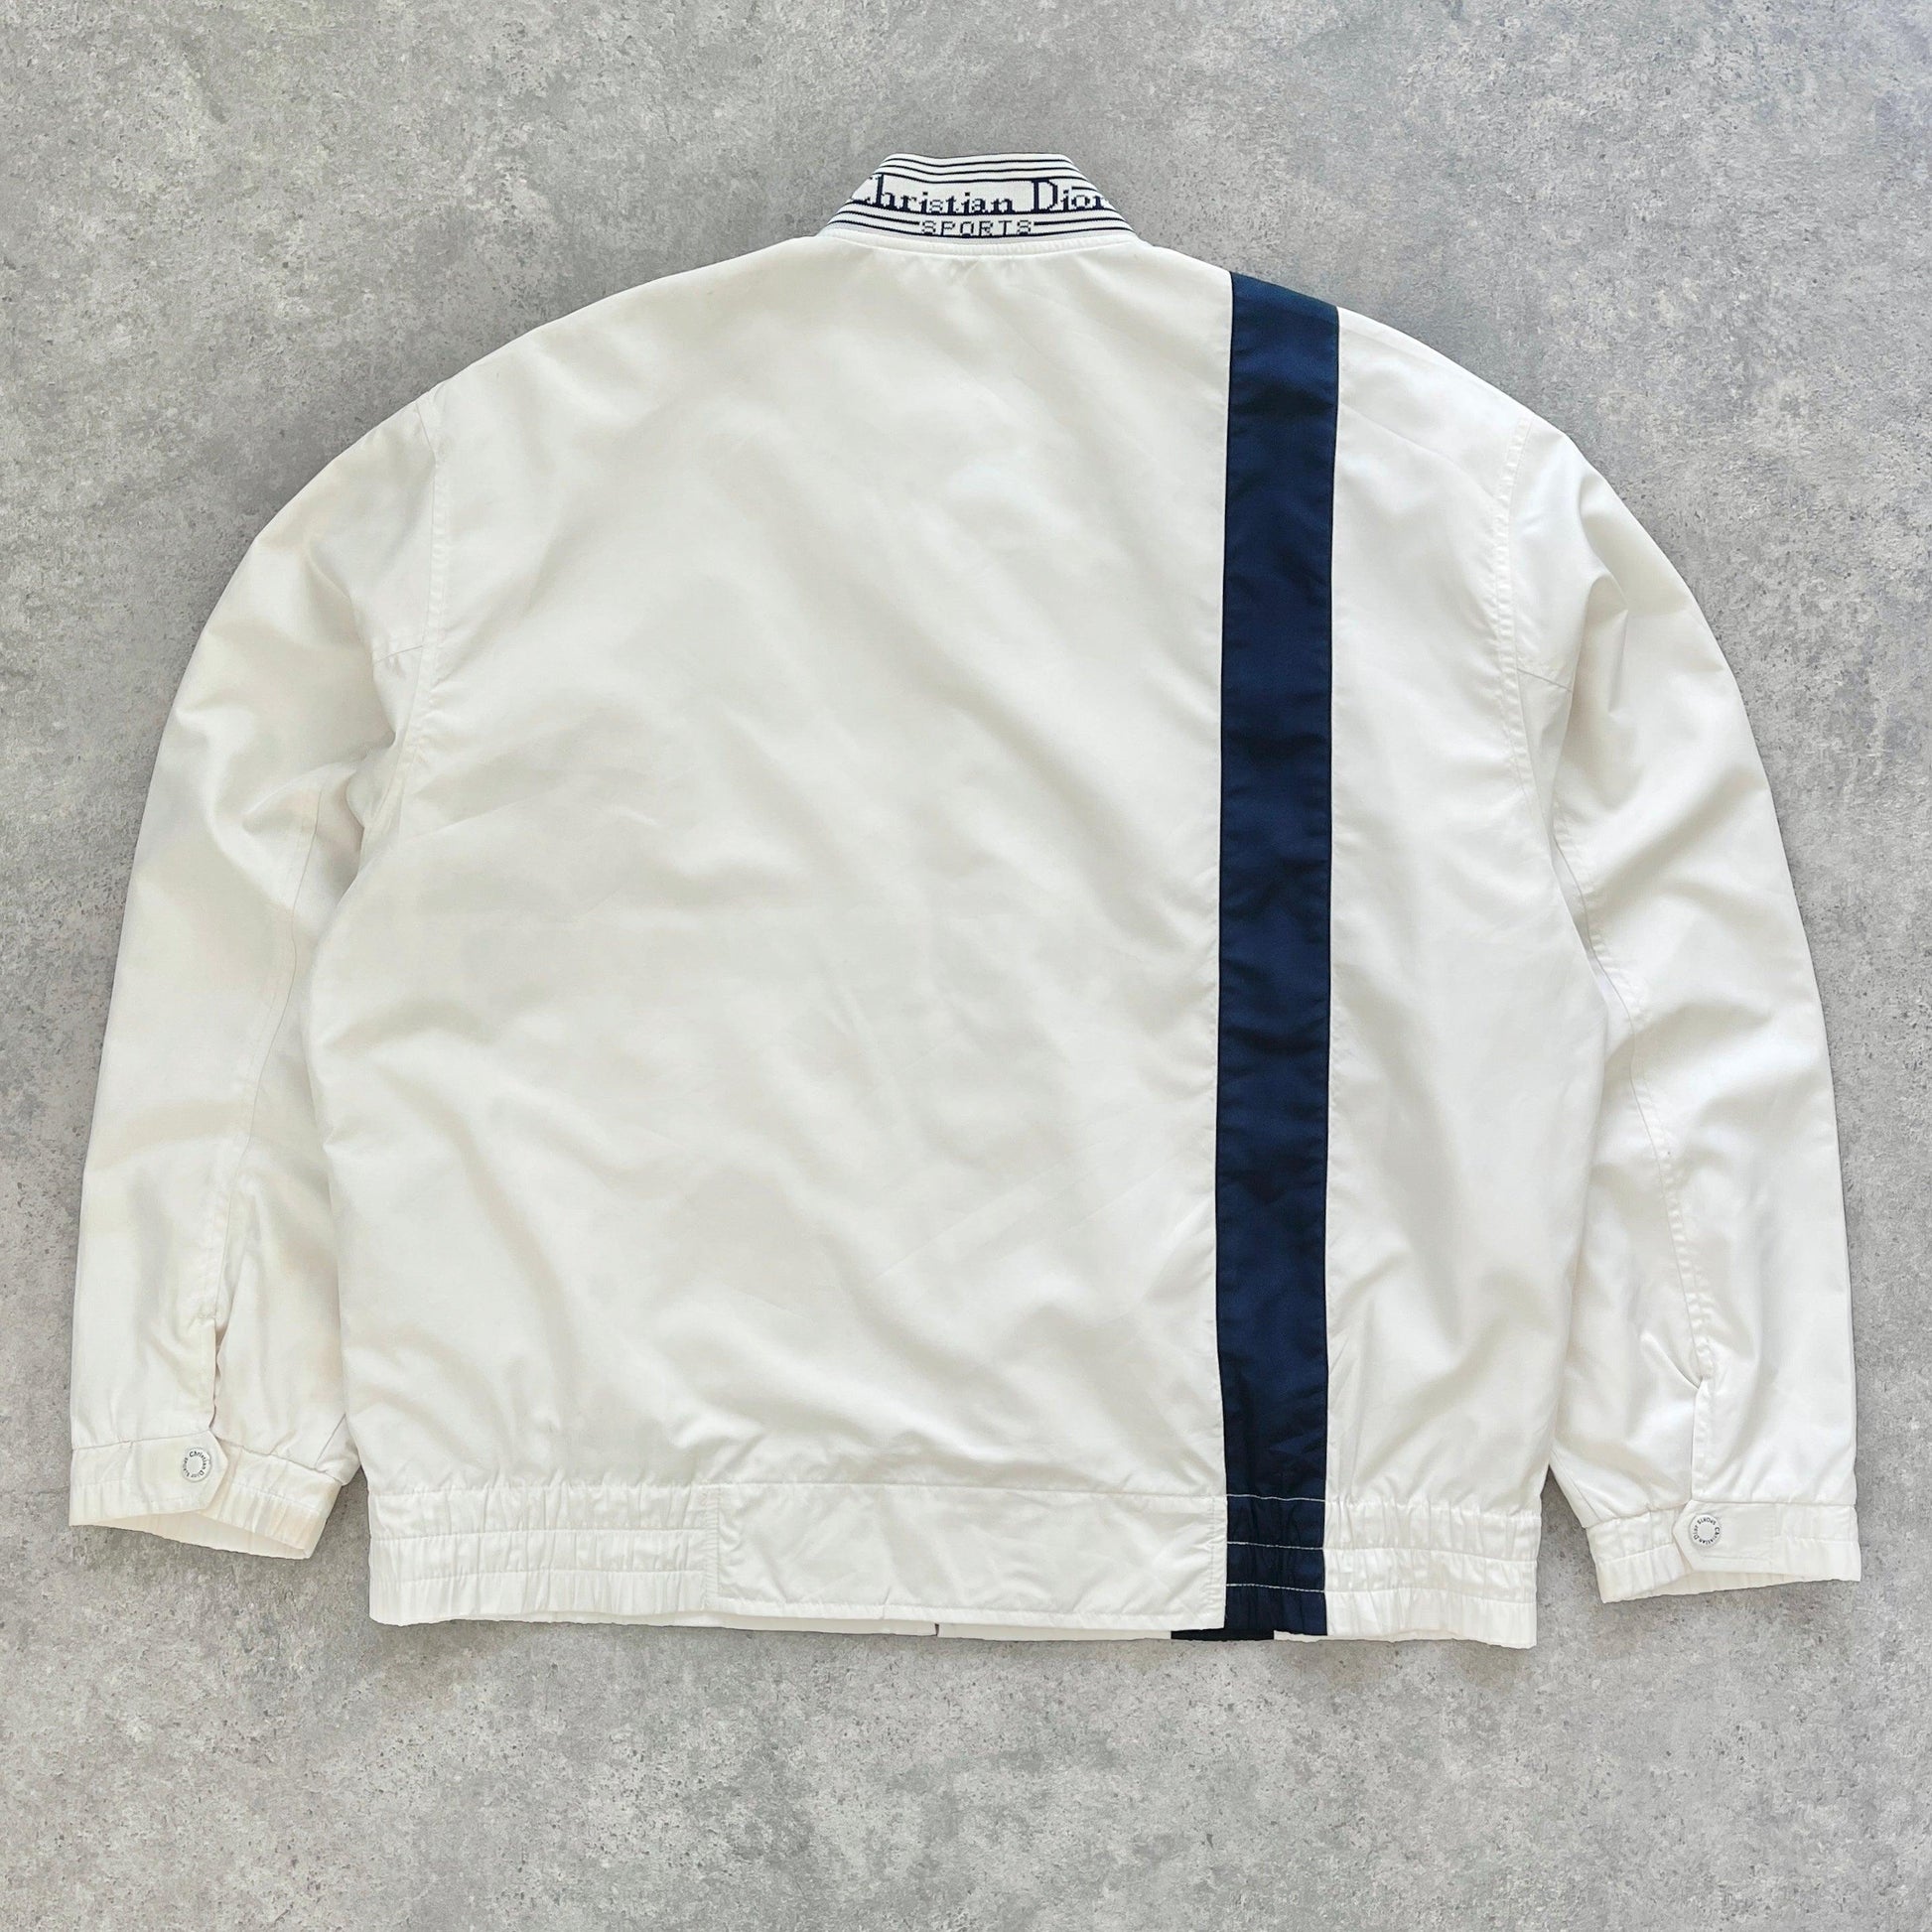 Christian Dior Sports 1990s lightweight bomber jacket (M) - Known Source